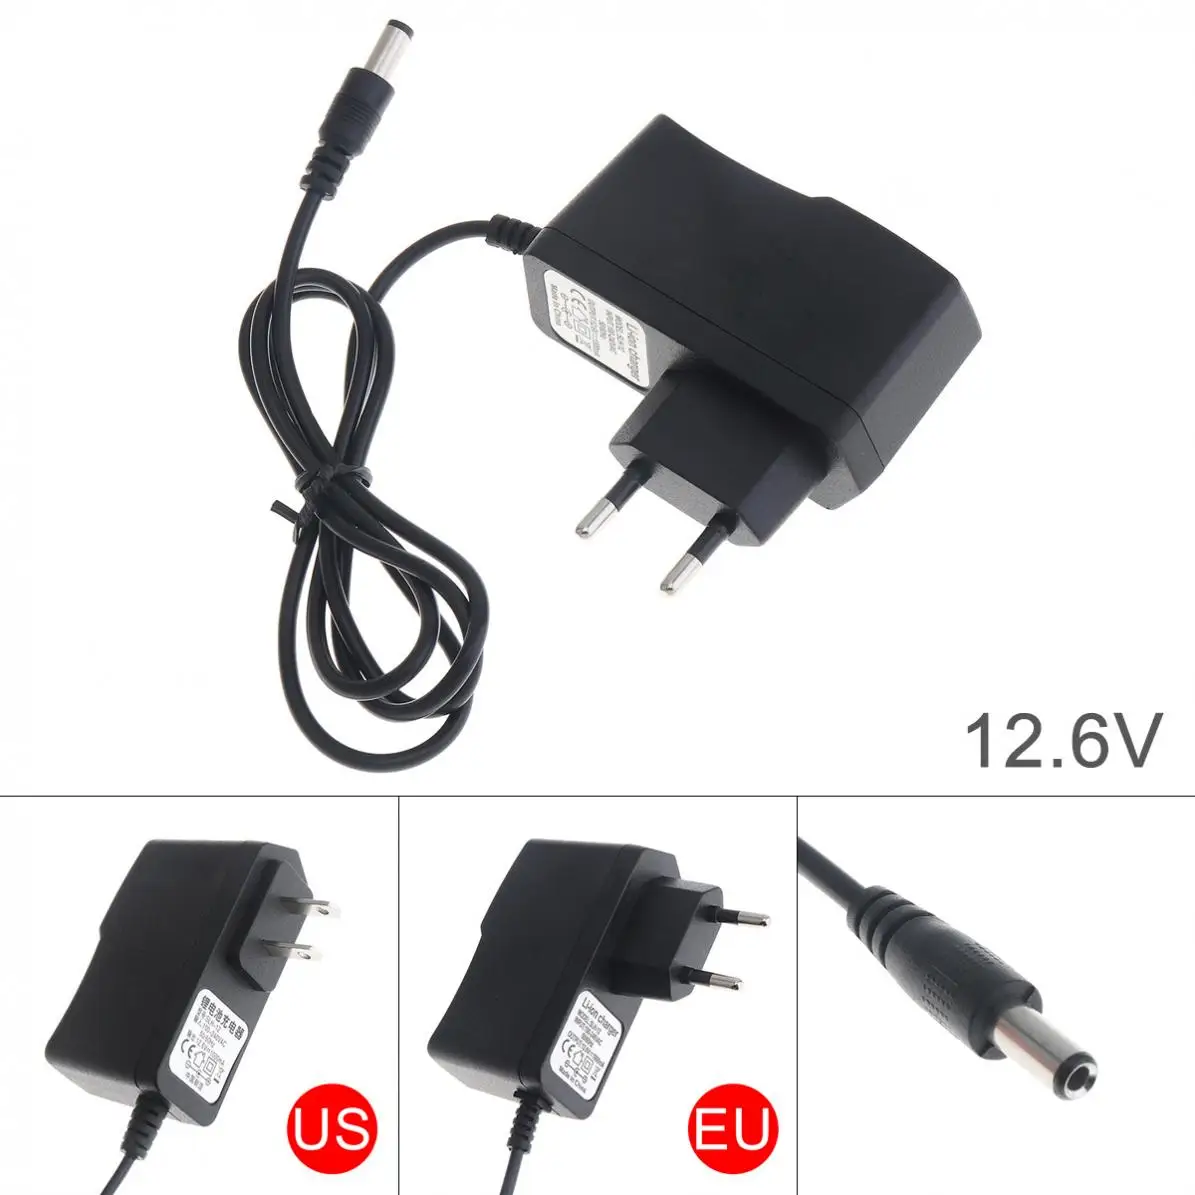 110cm 12.6V Power Adapter Charger with EU Plug and US Plug for Lithium Electric Drill /Electric Screwdriver